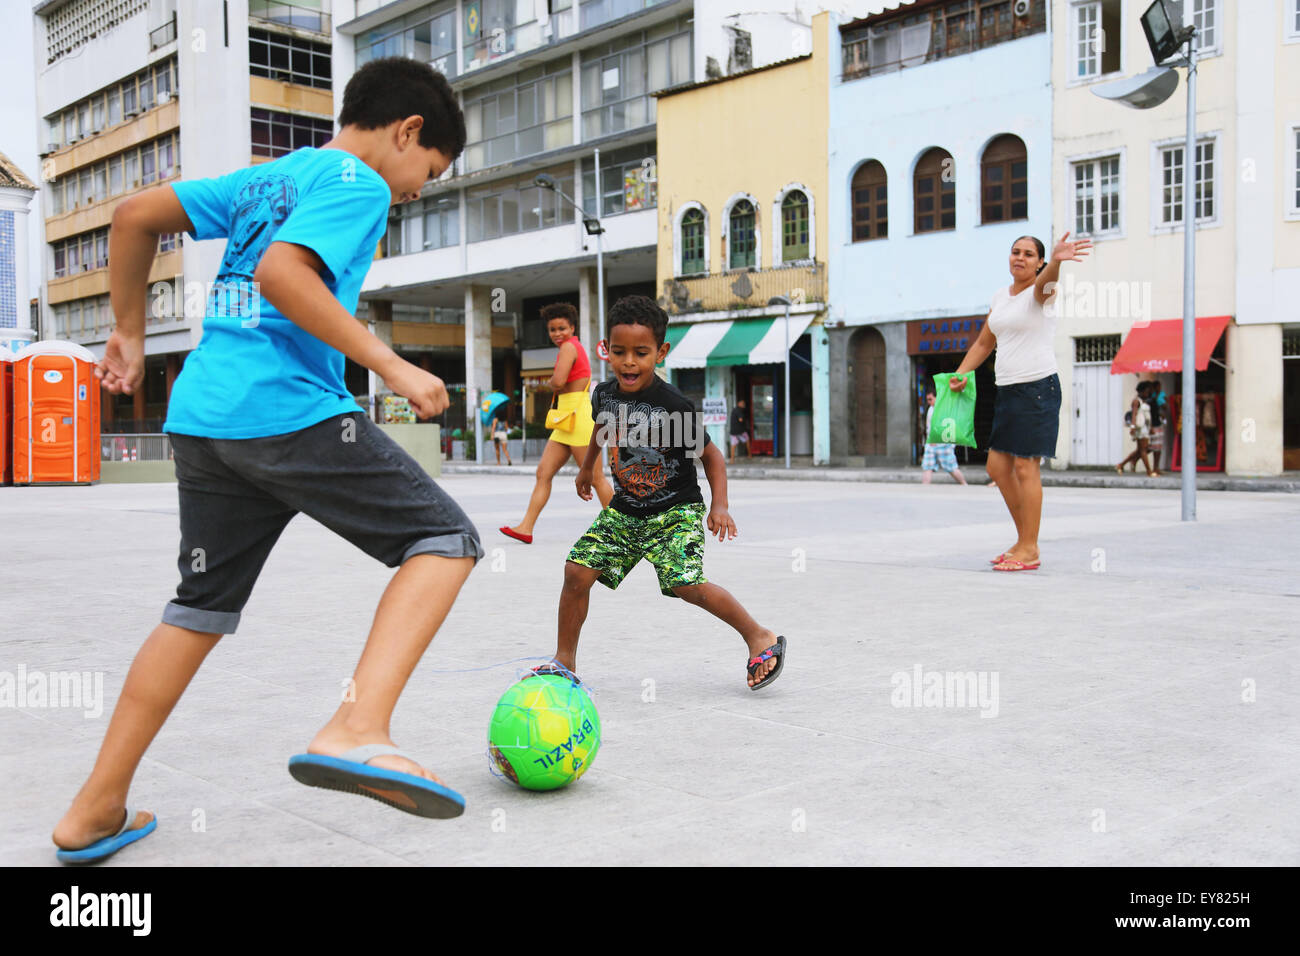 Kids playing soccer in the street, Brazil Stock Photo